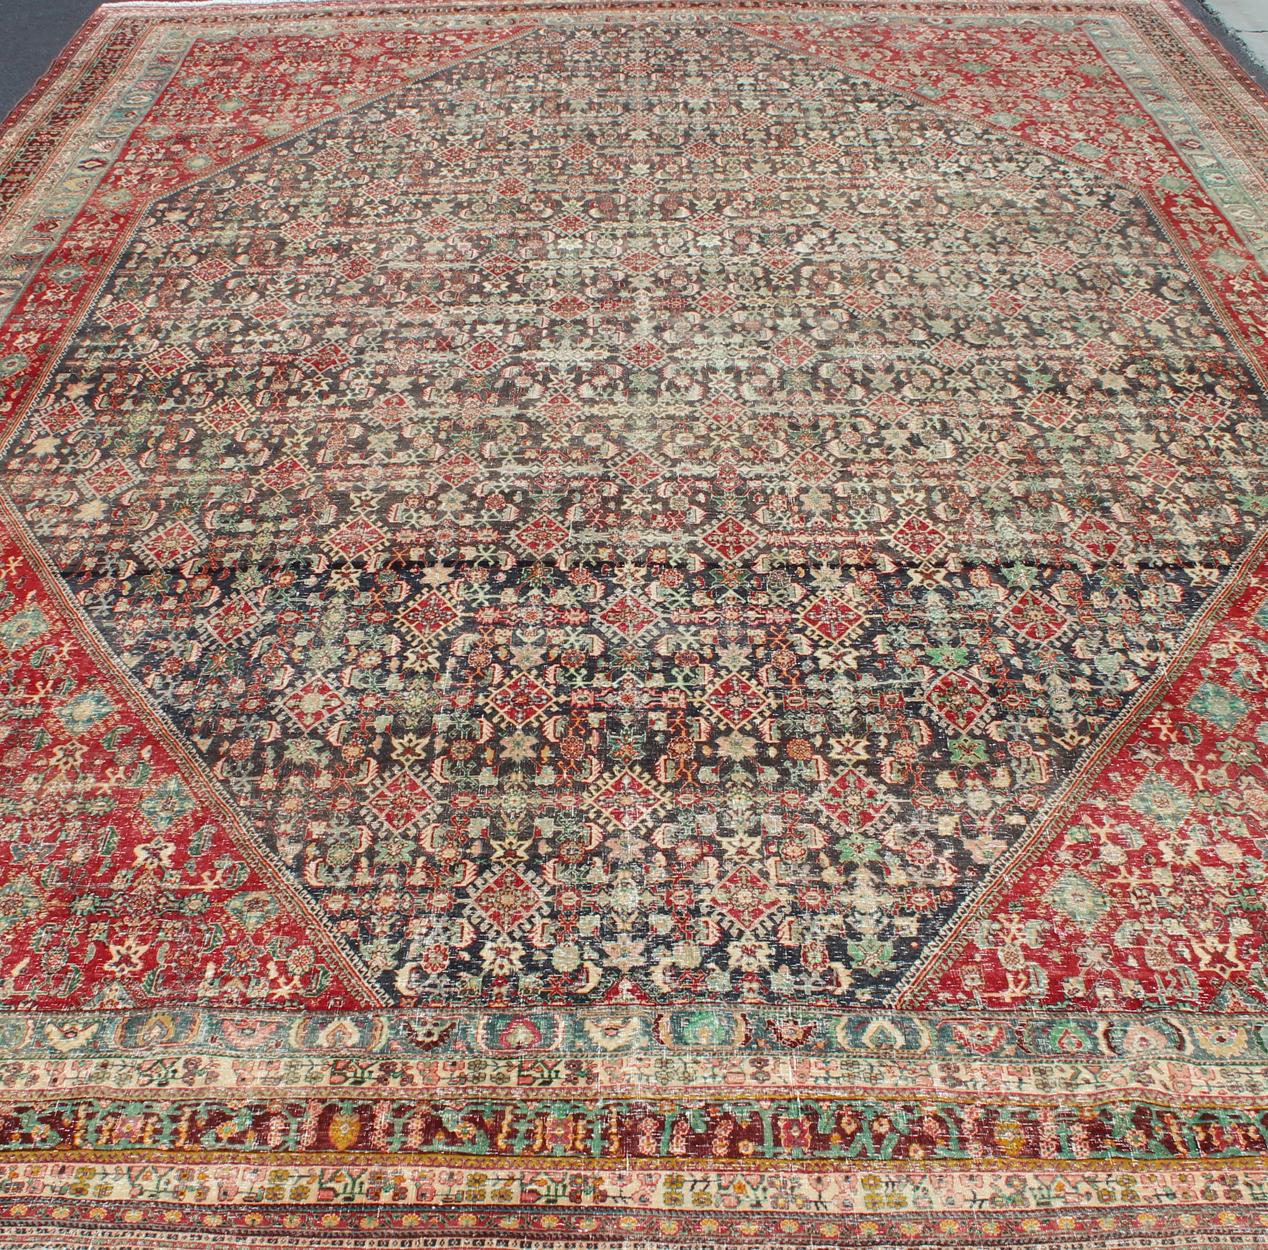 Colorful Large Persian Antique Qashqai rug with A Beautiful Tribal Motif Design For Sale 4